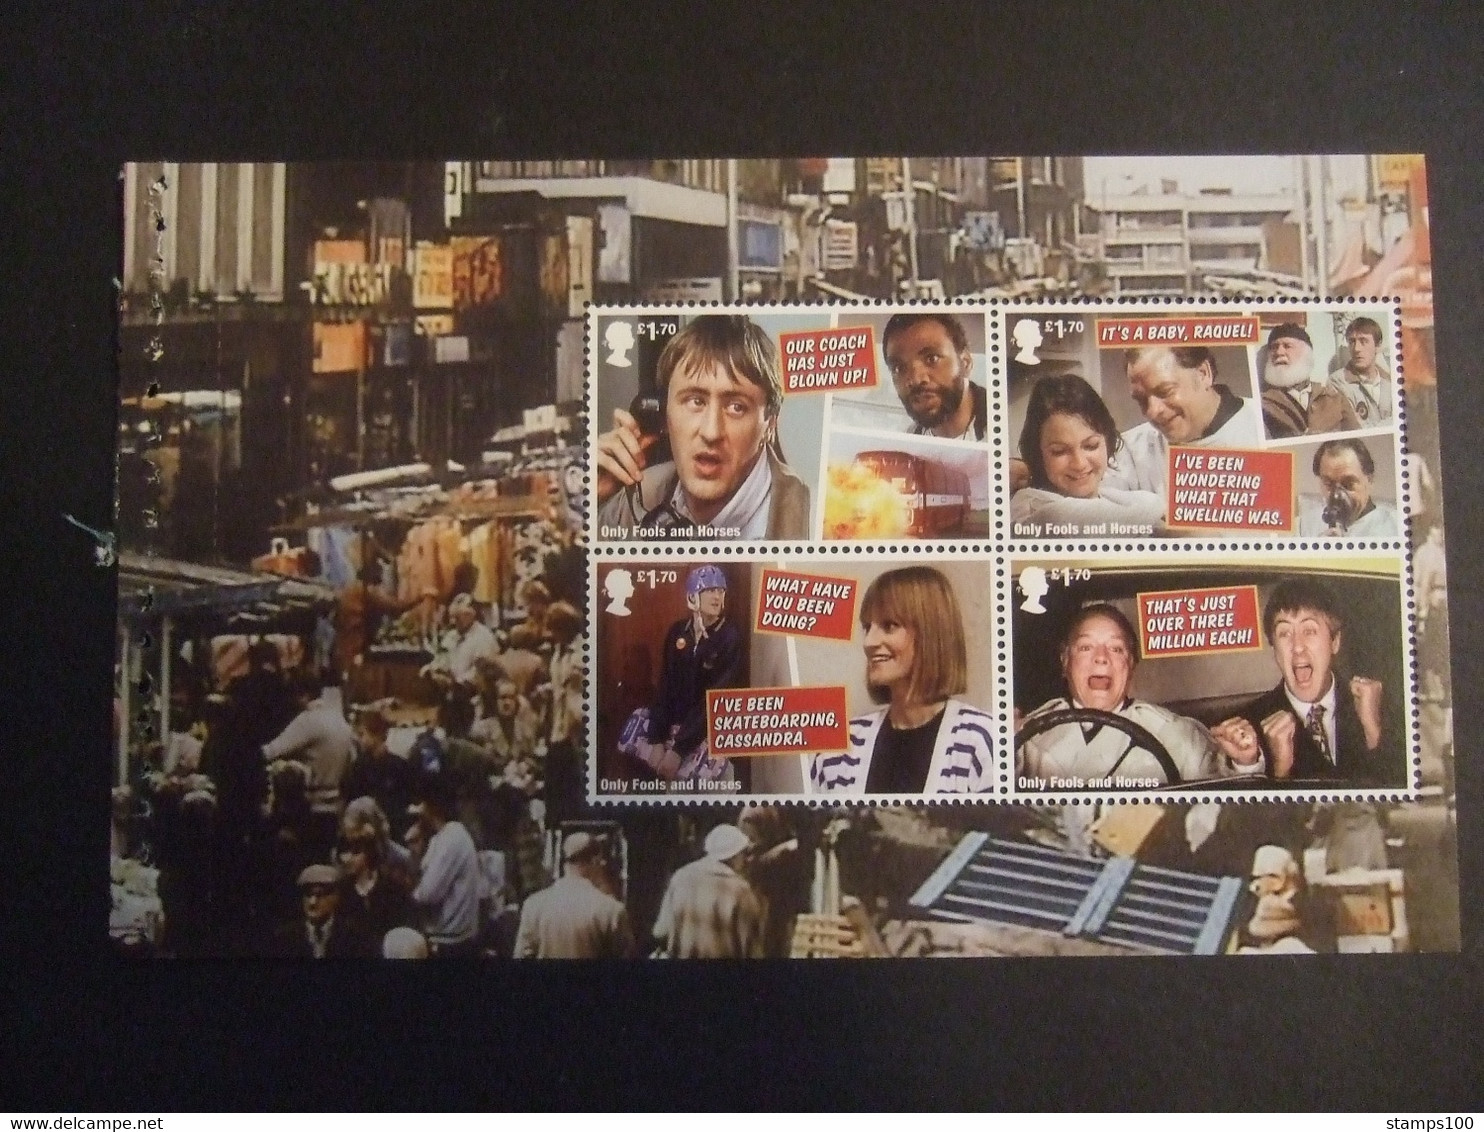 GREAT BRITAIN 2021 ONLY FOOLS AND HORSES PRESTIGE PANES 1 AND 4 UNMOUNTED MINT.(2 Pictures)  MNH **. (IS53-10) - Ohne Zuordnung